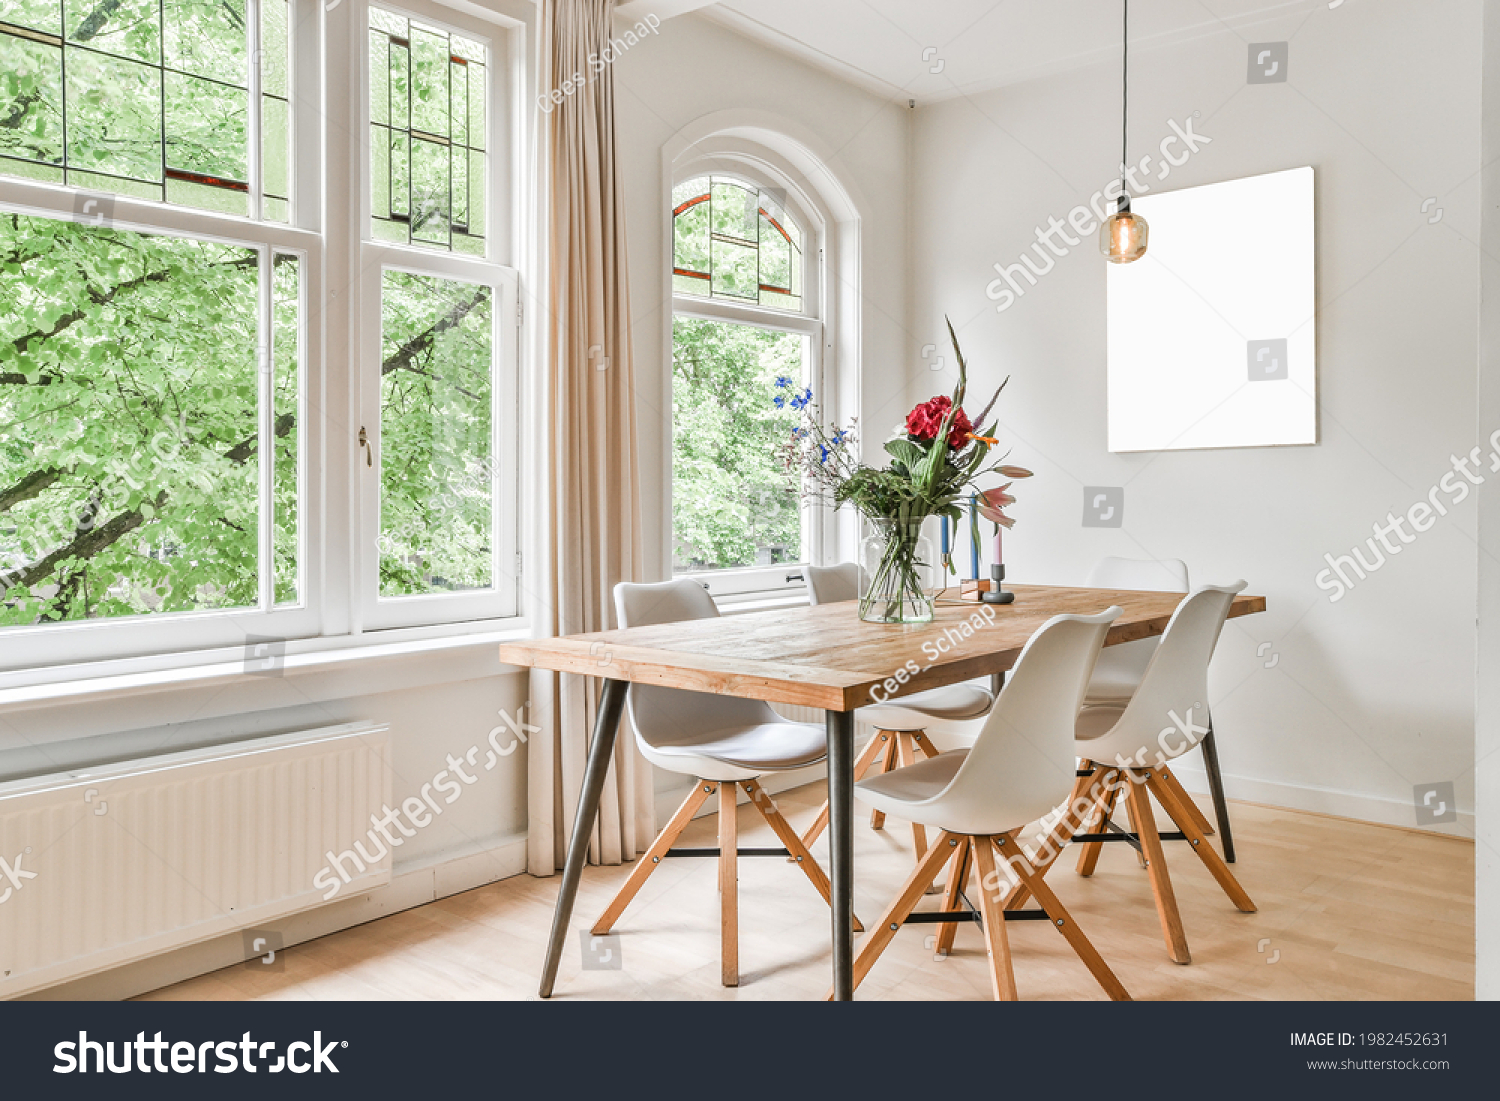 Table with flowers and chairs located near windows and abstract painting in light dining room at daytime #1982452631